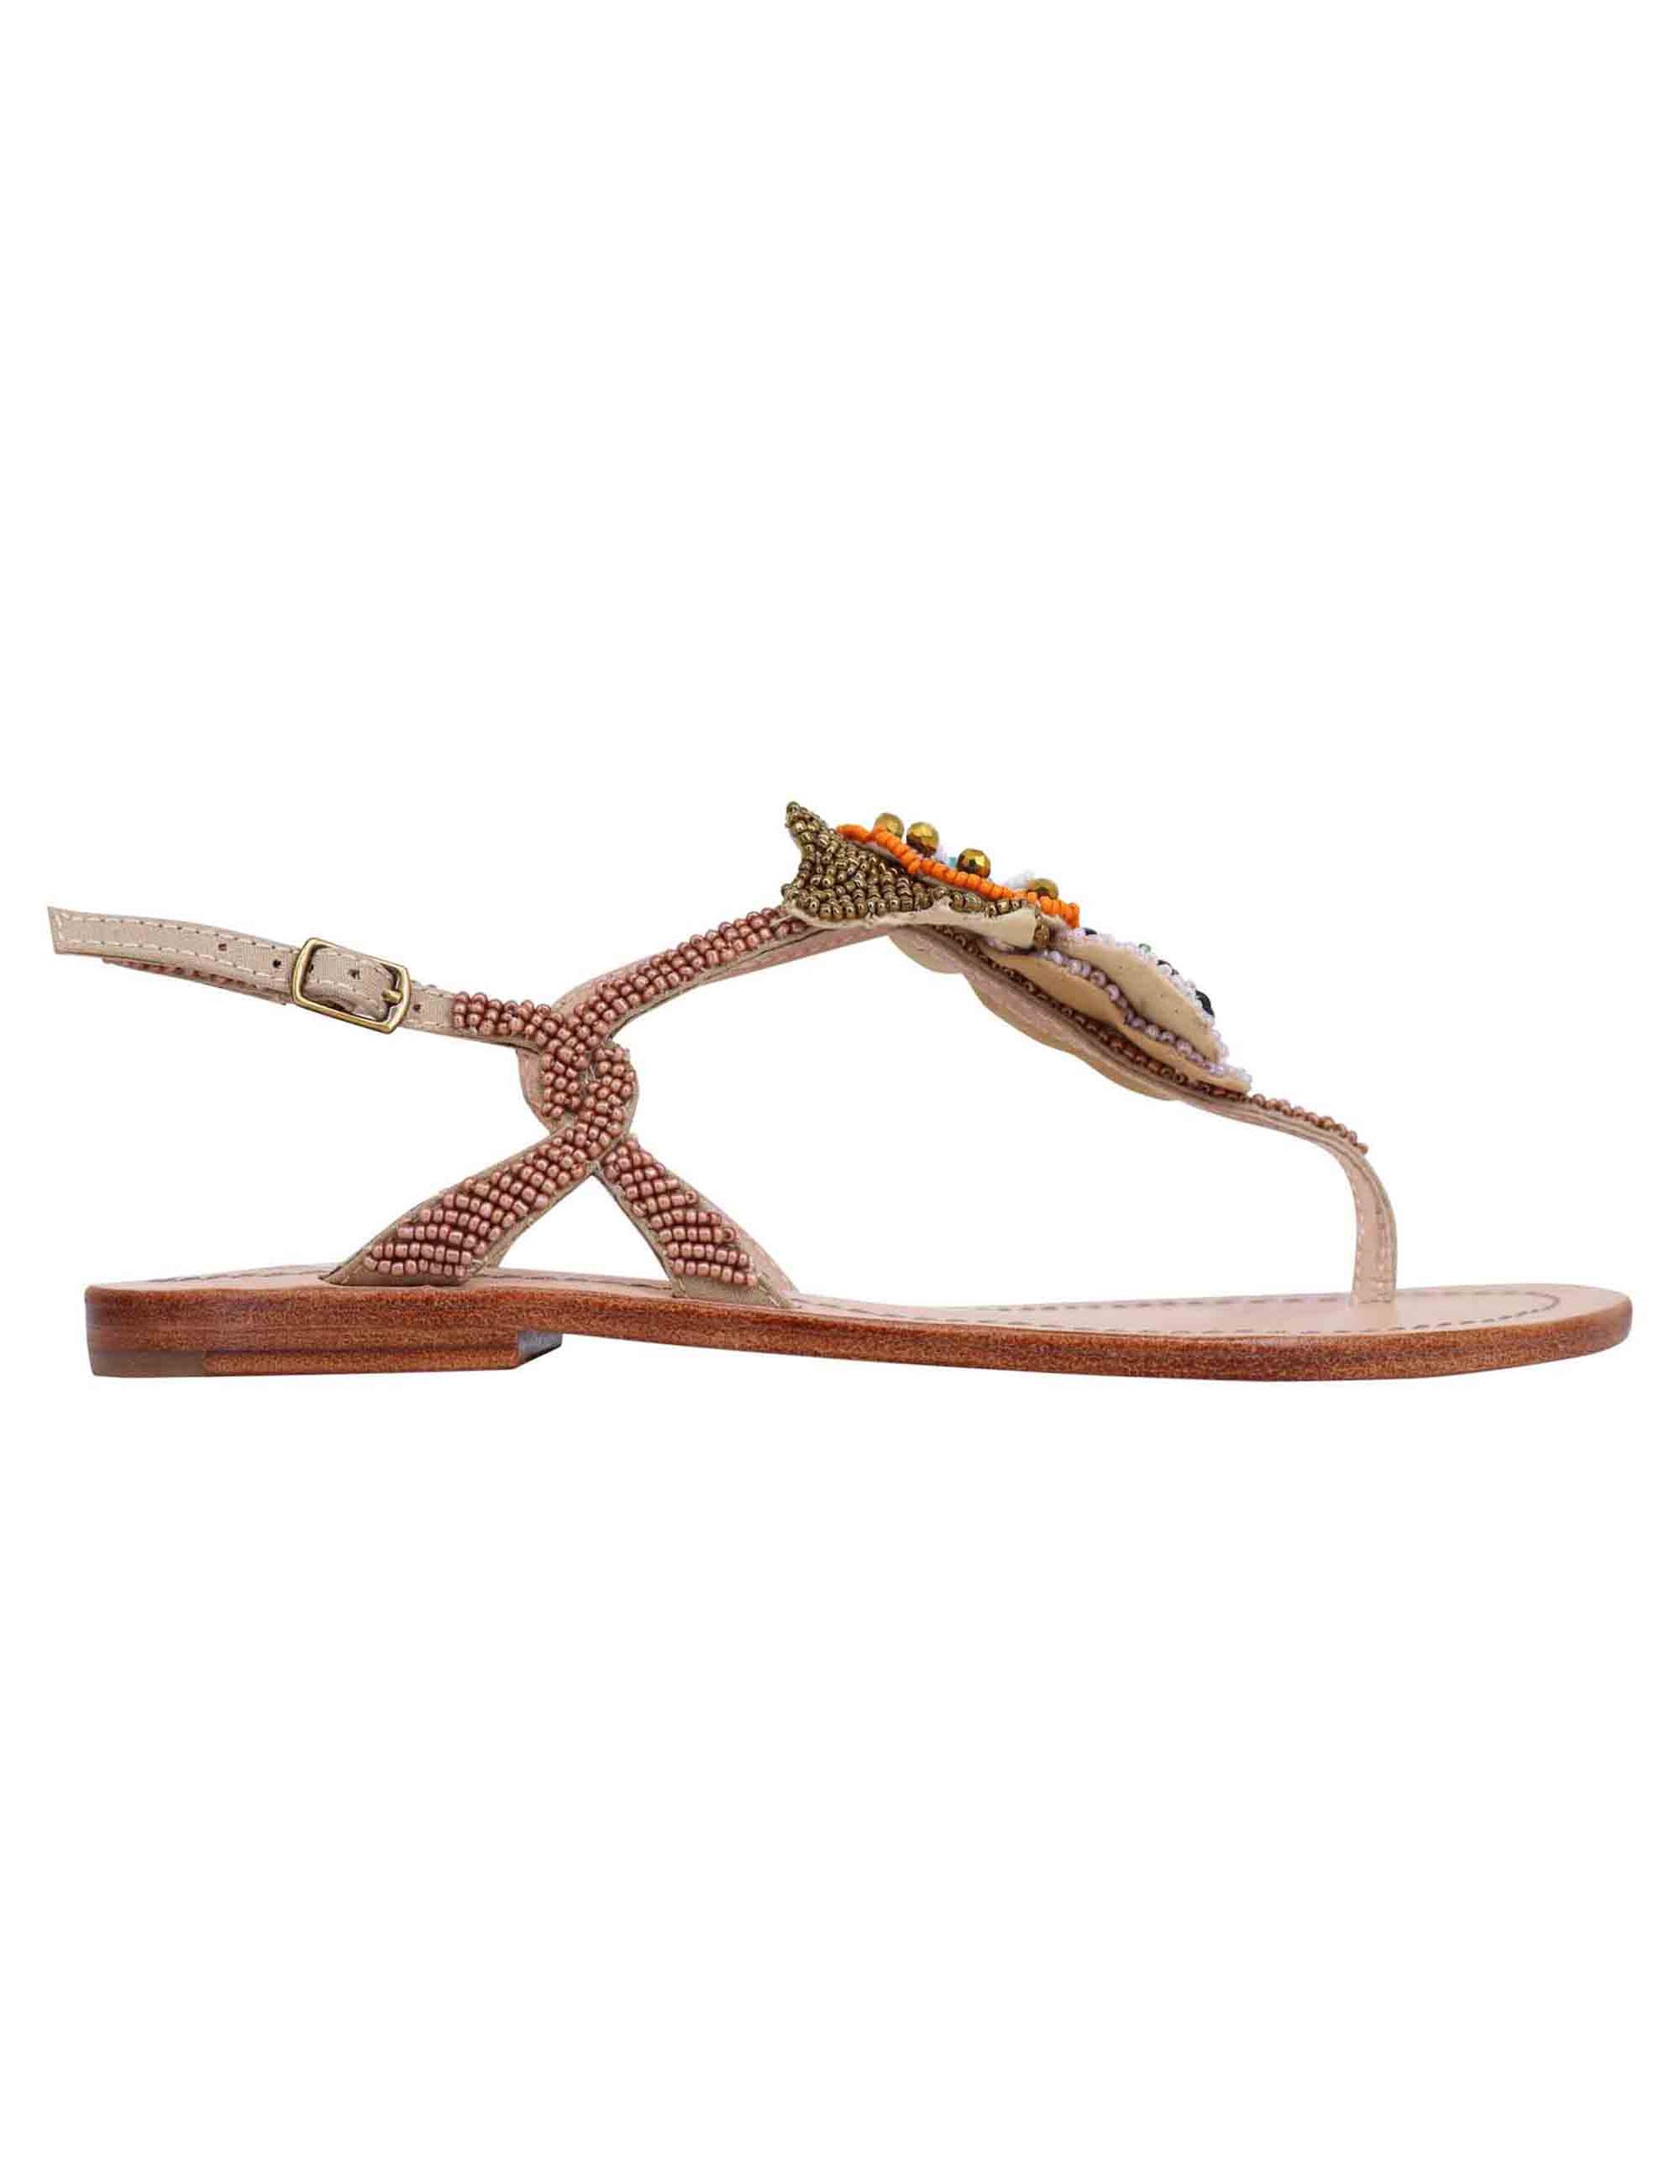 Women's flat flip-flop sandals in pink and multi beads with leather sole